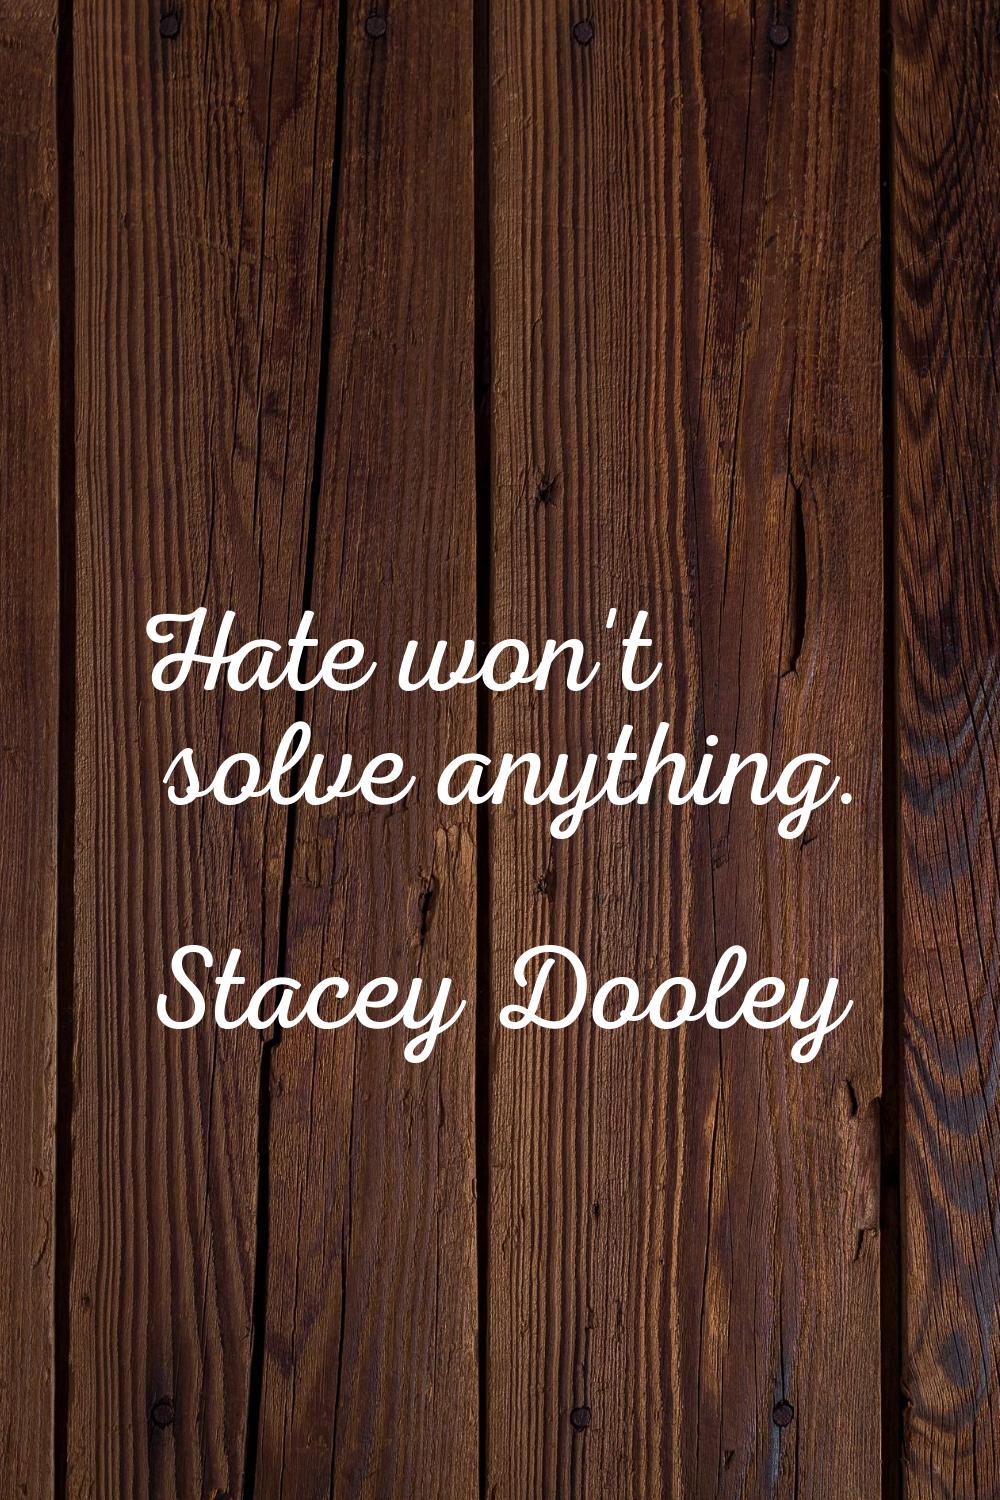 Hate won't solve anything.